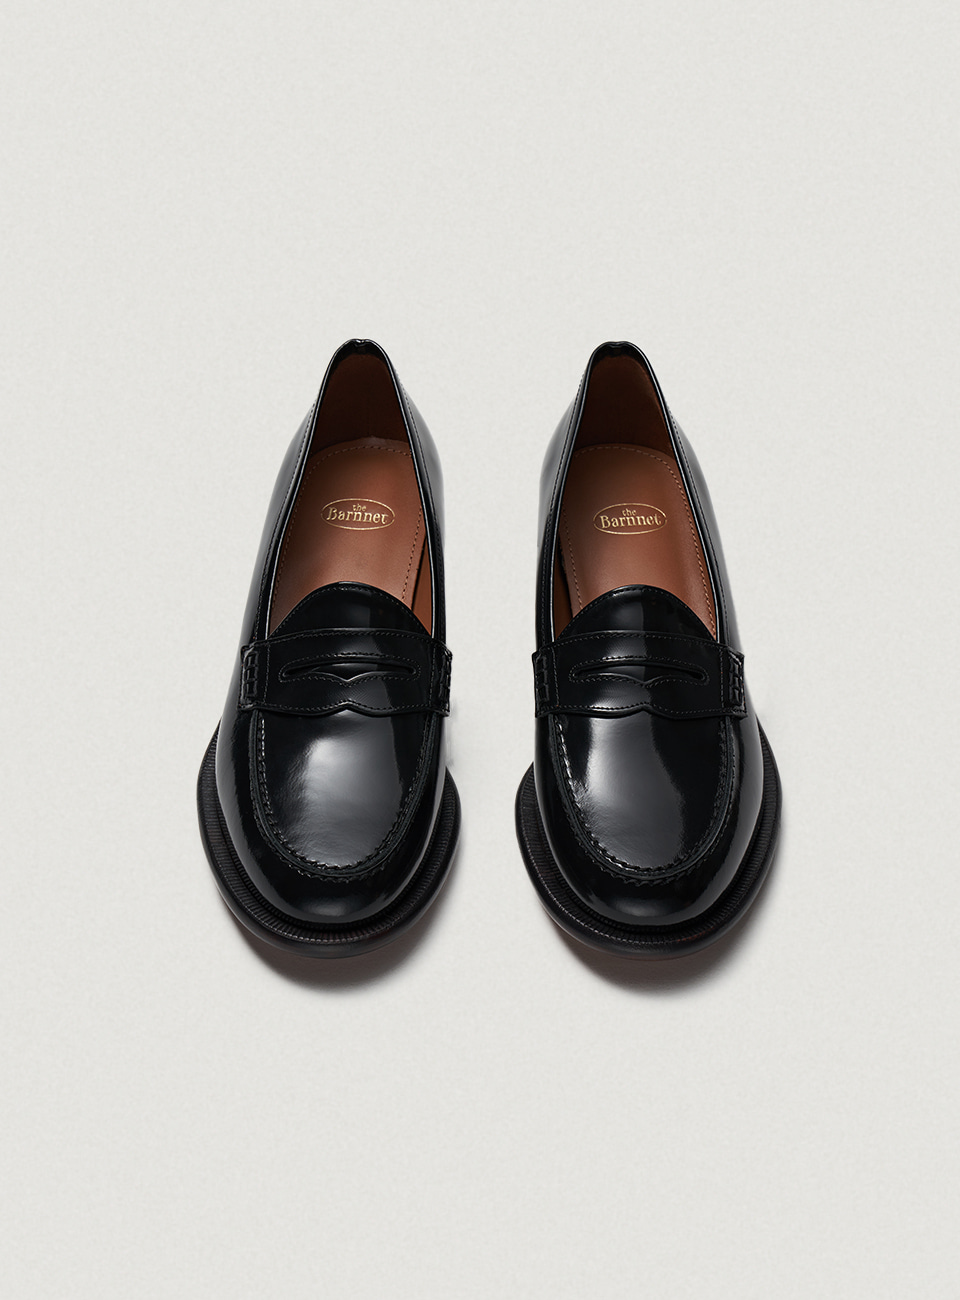 Black Box Penny Loafers